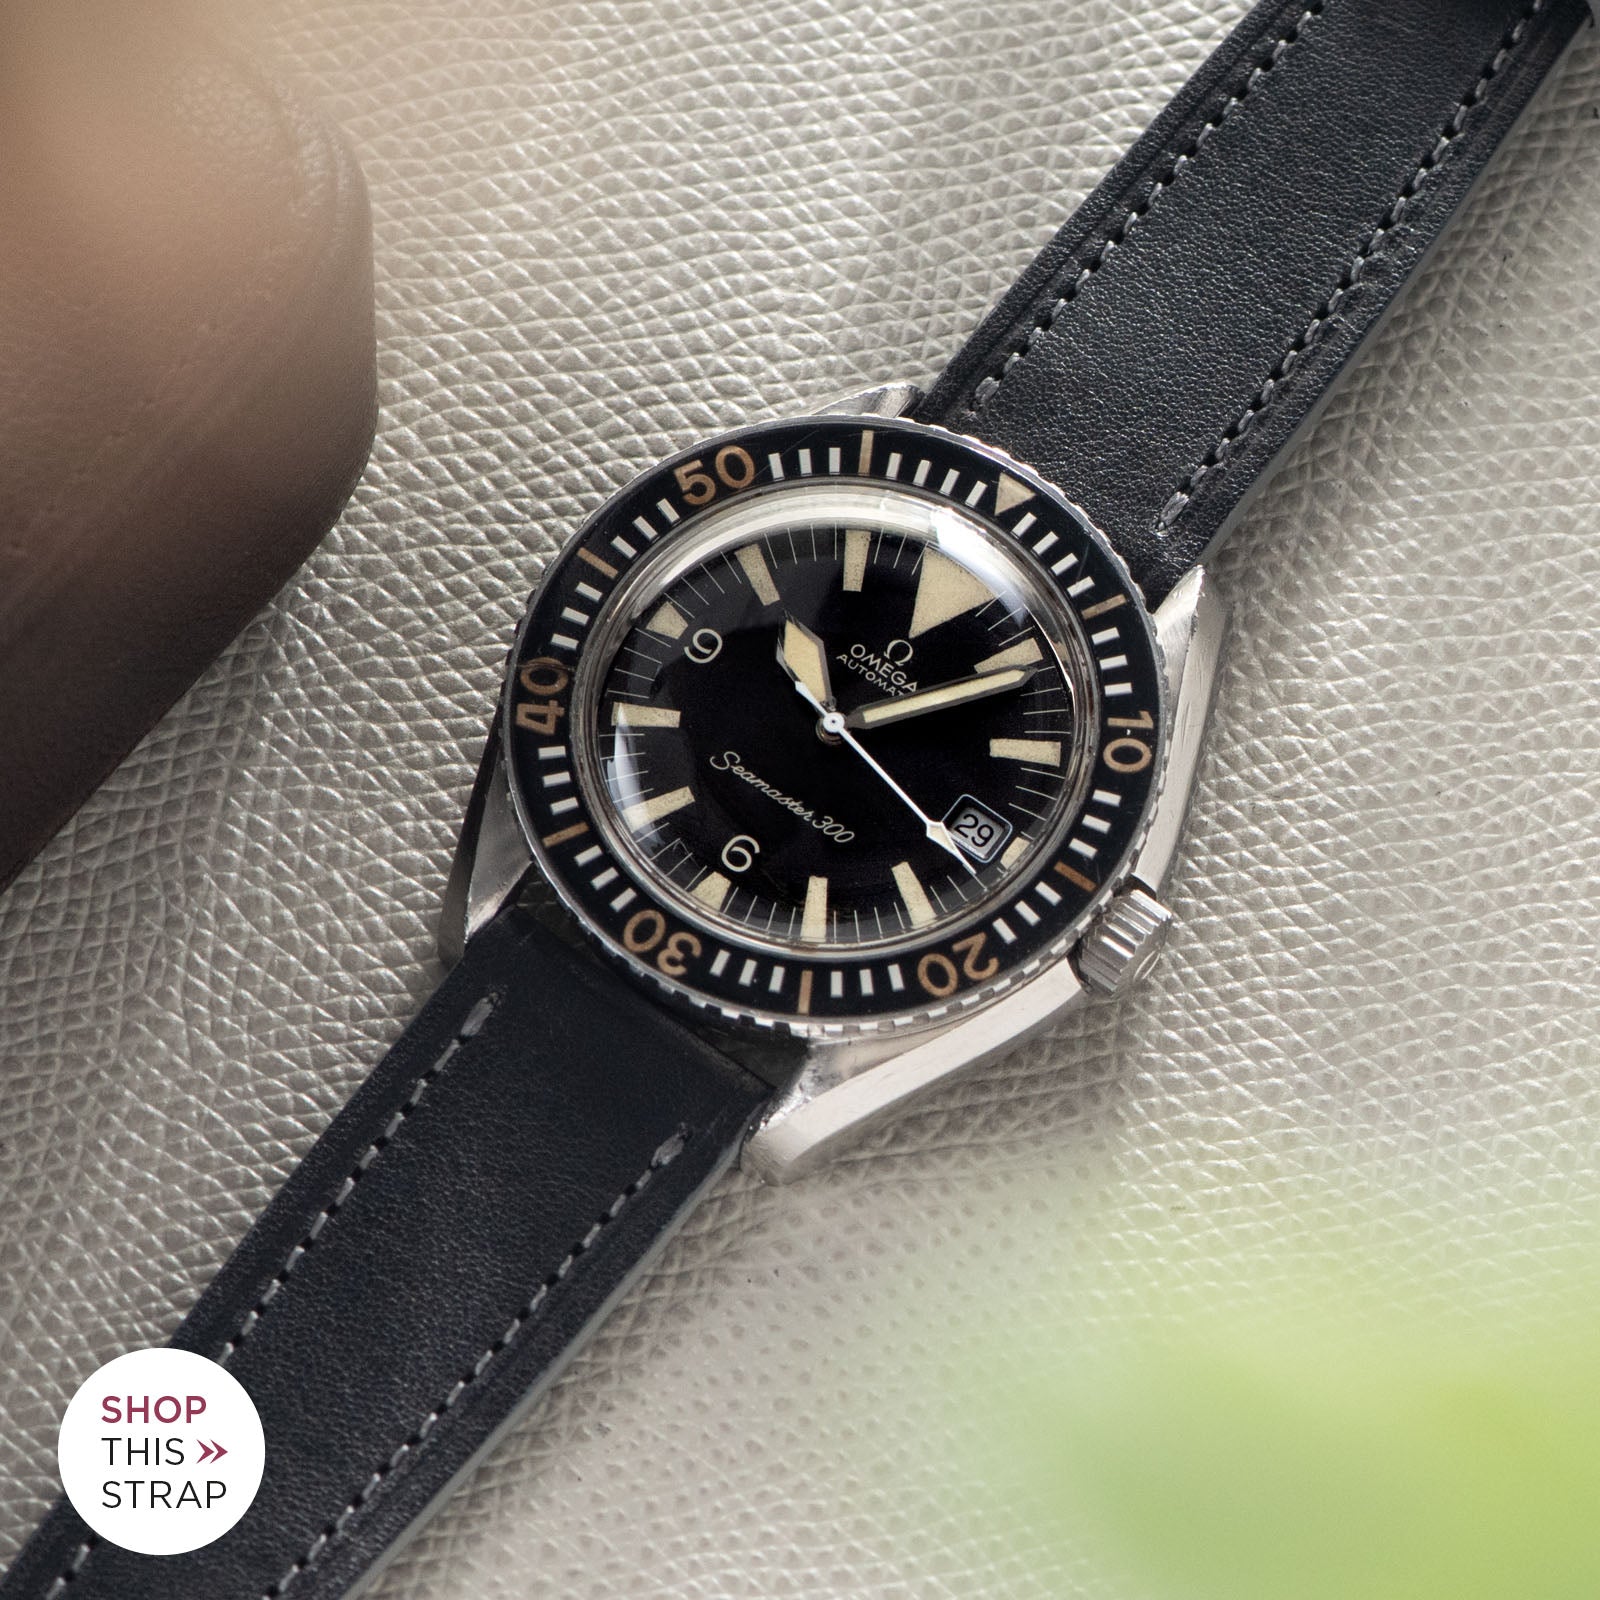 Bulang and Sons_Strap Guide_The omega SM 300 Seamaster_Café Noir Leather Watch Strap